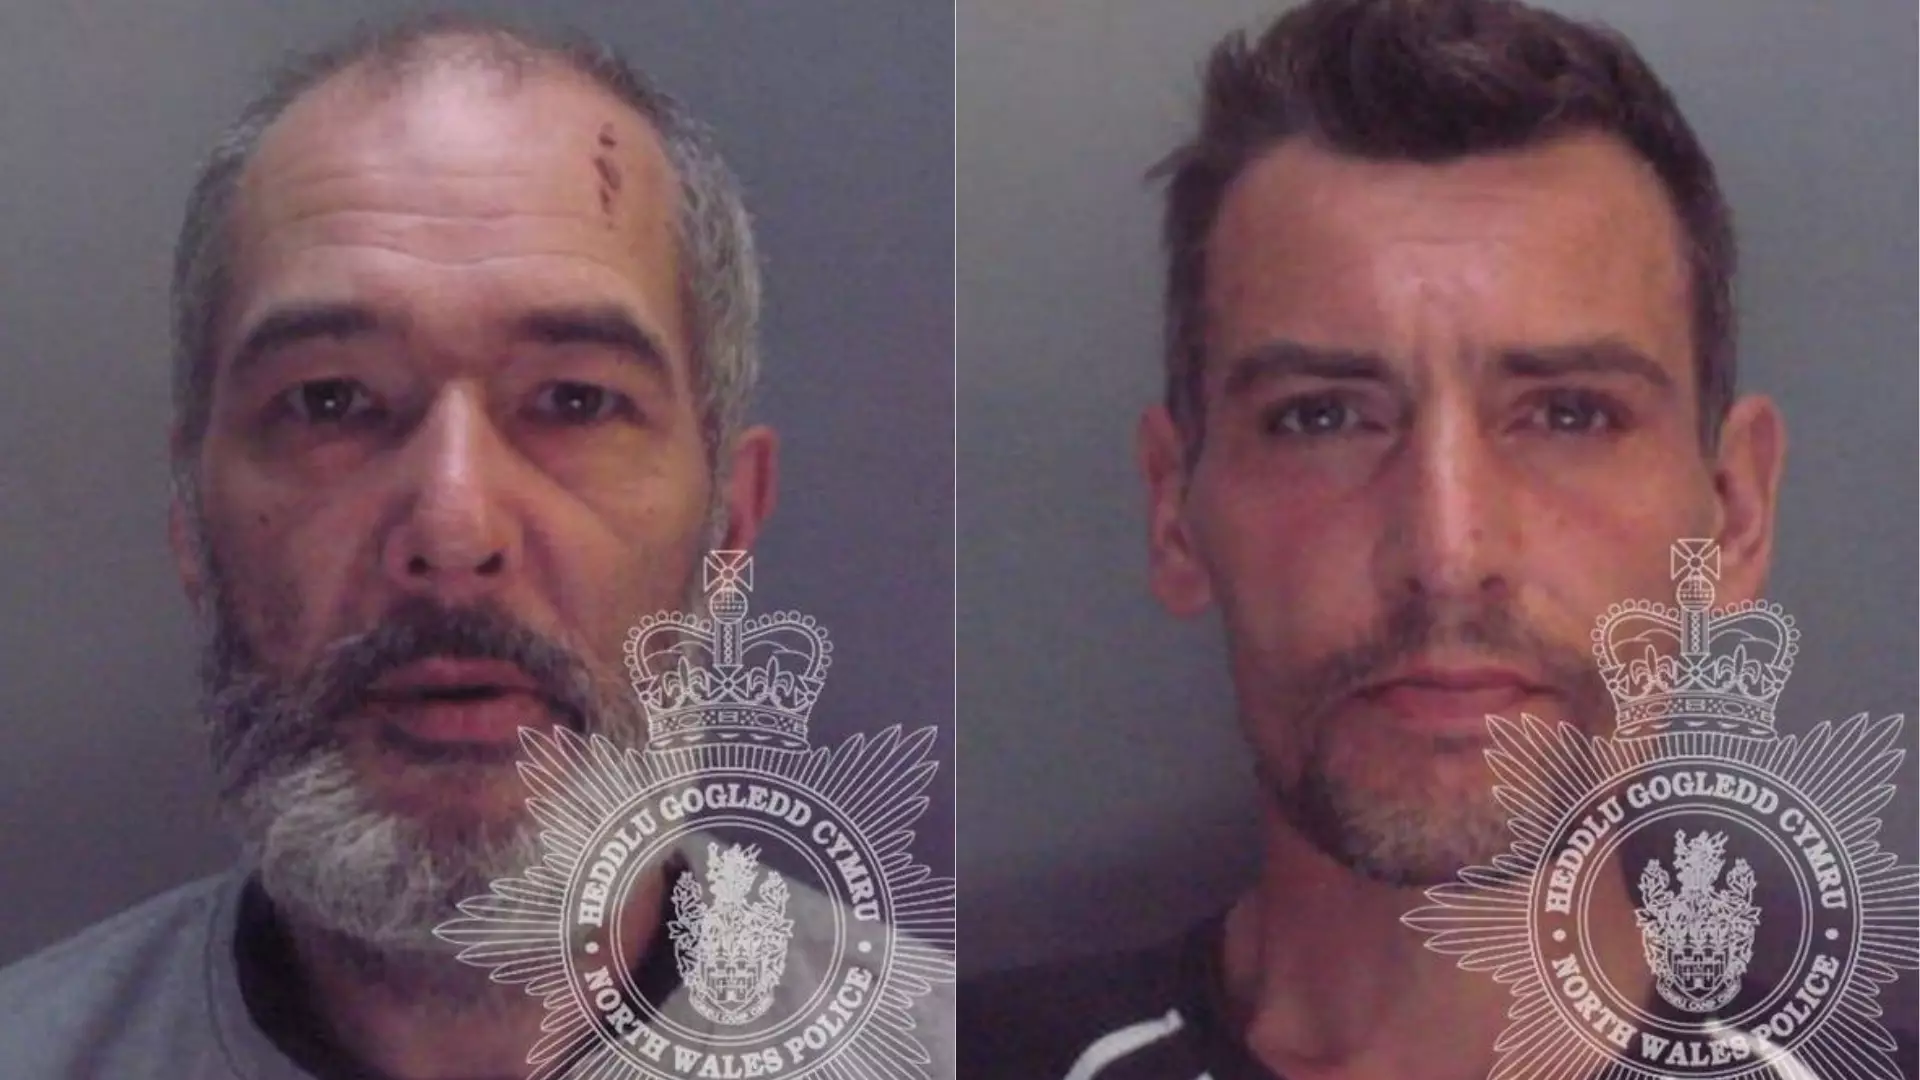 Fothergill, 43 and Williams, 51, were found guilty of stealing from the blind busker.